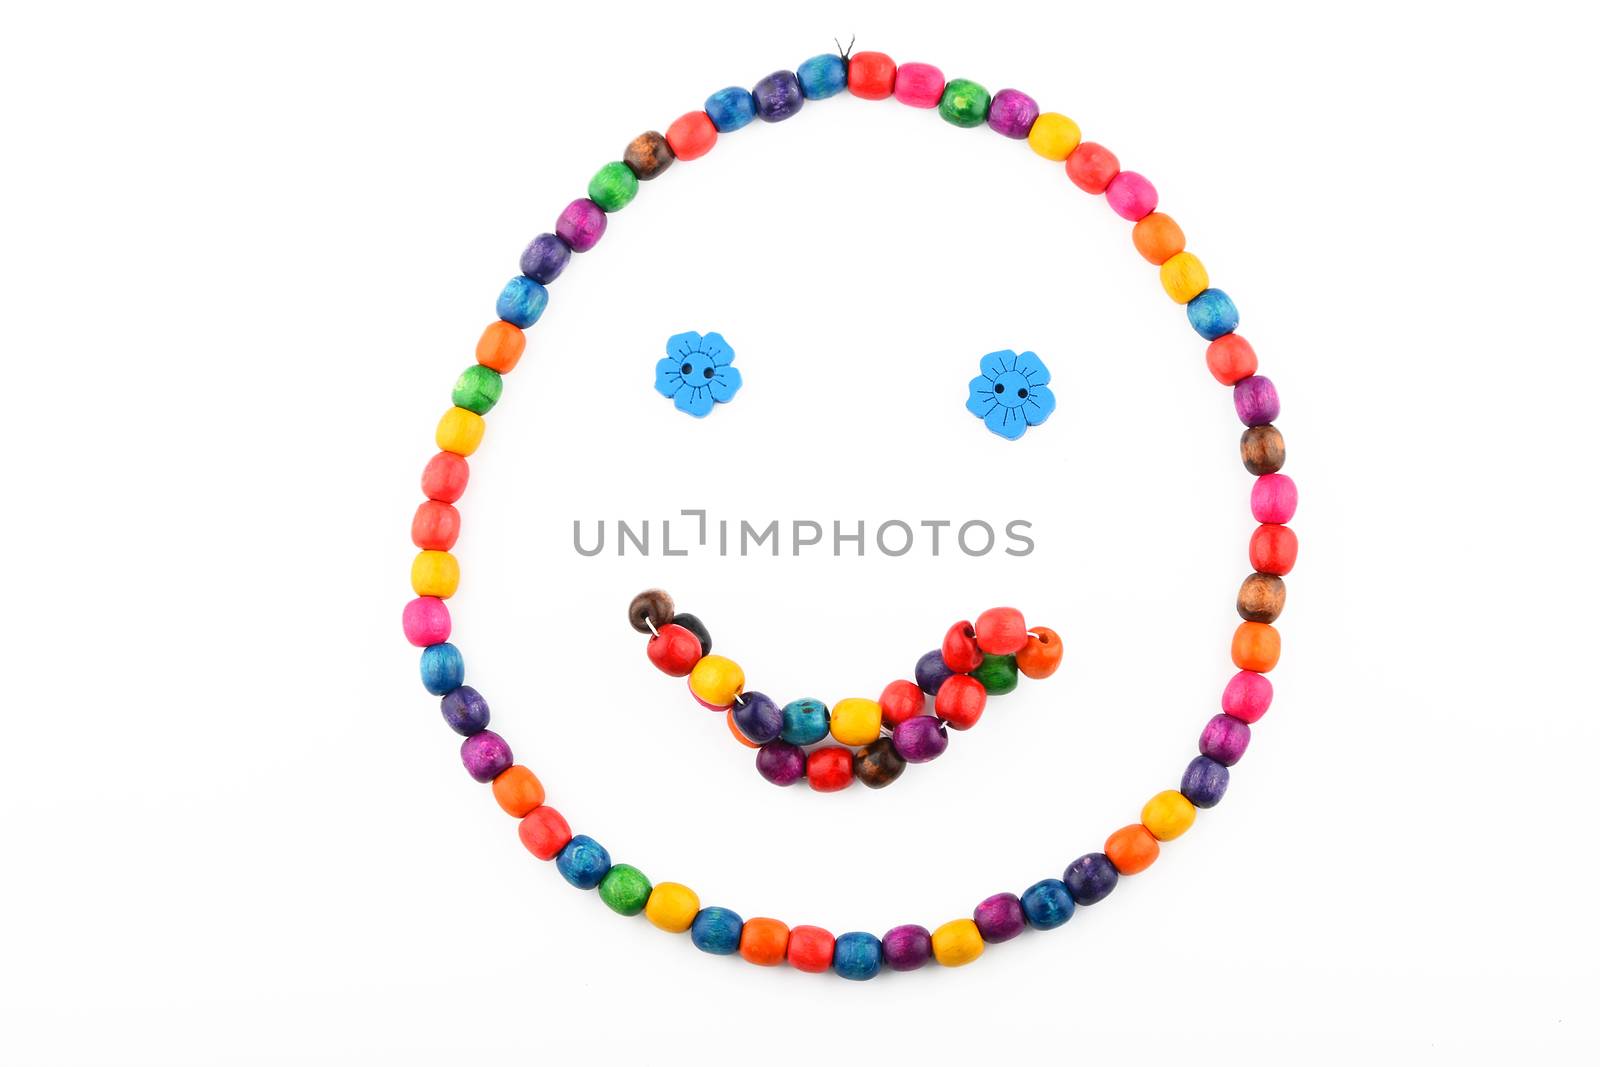 Smile of colorful handmade wooden round beads necklace and bracelet isolated on white